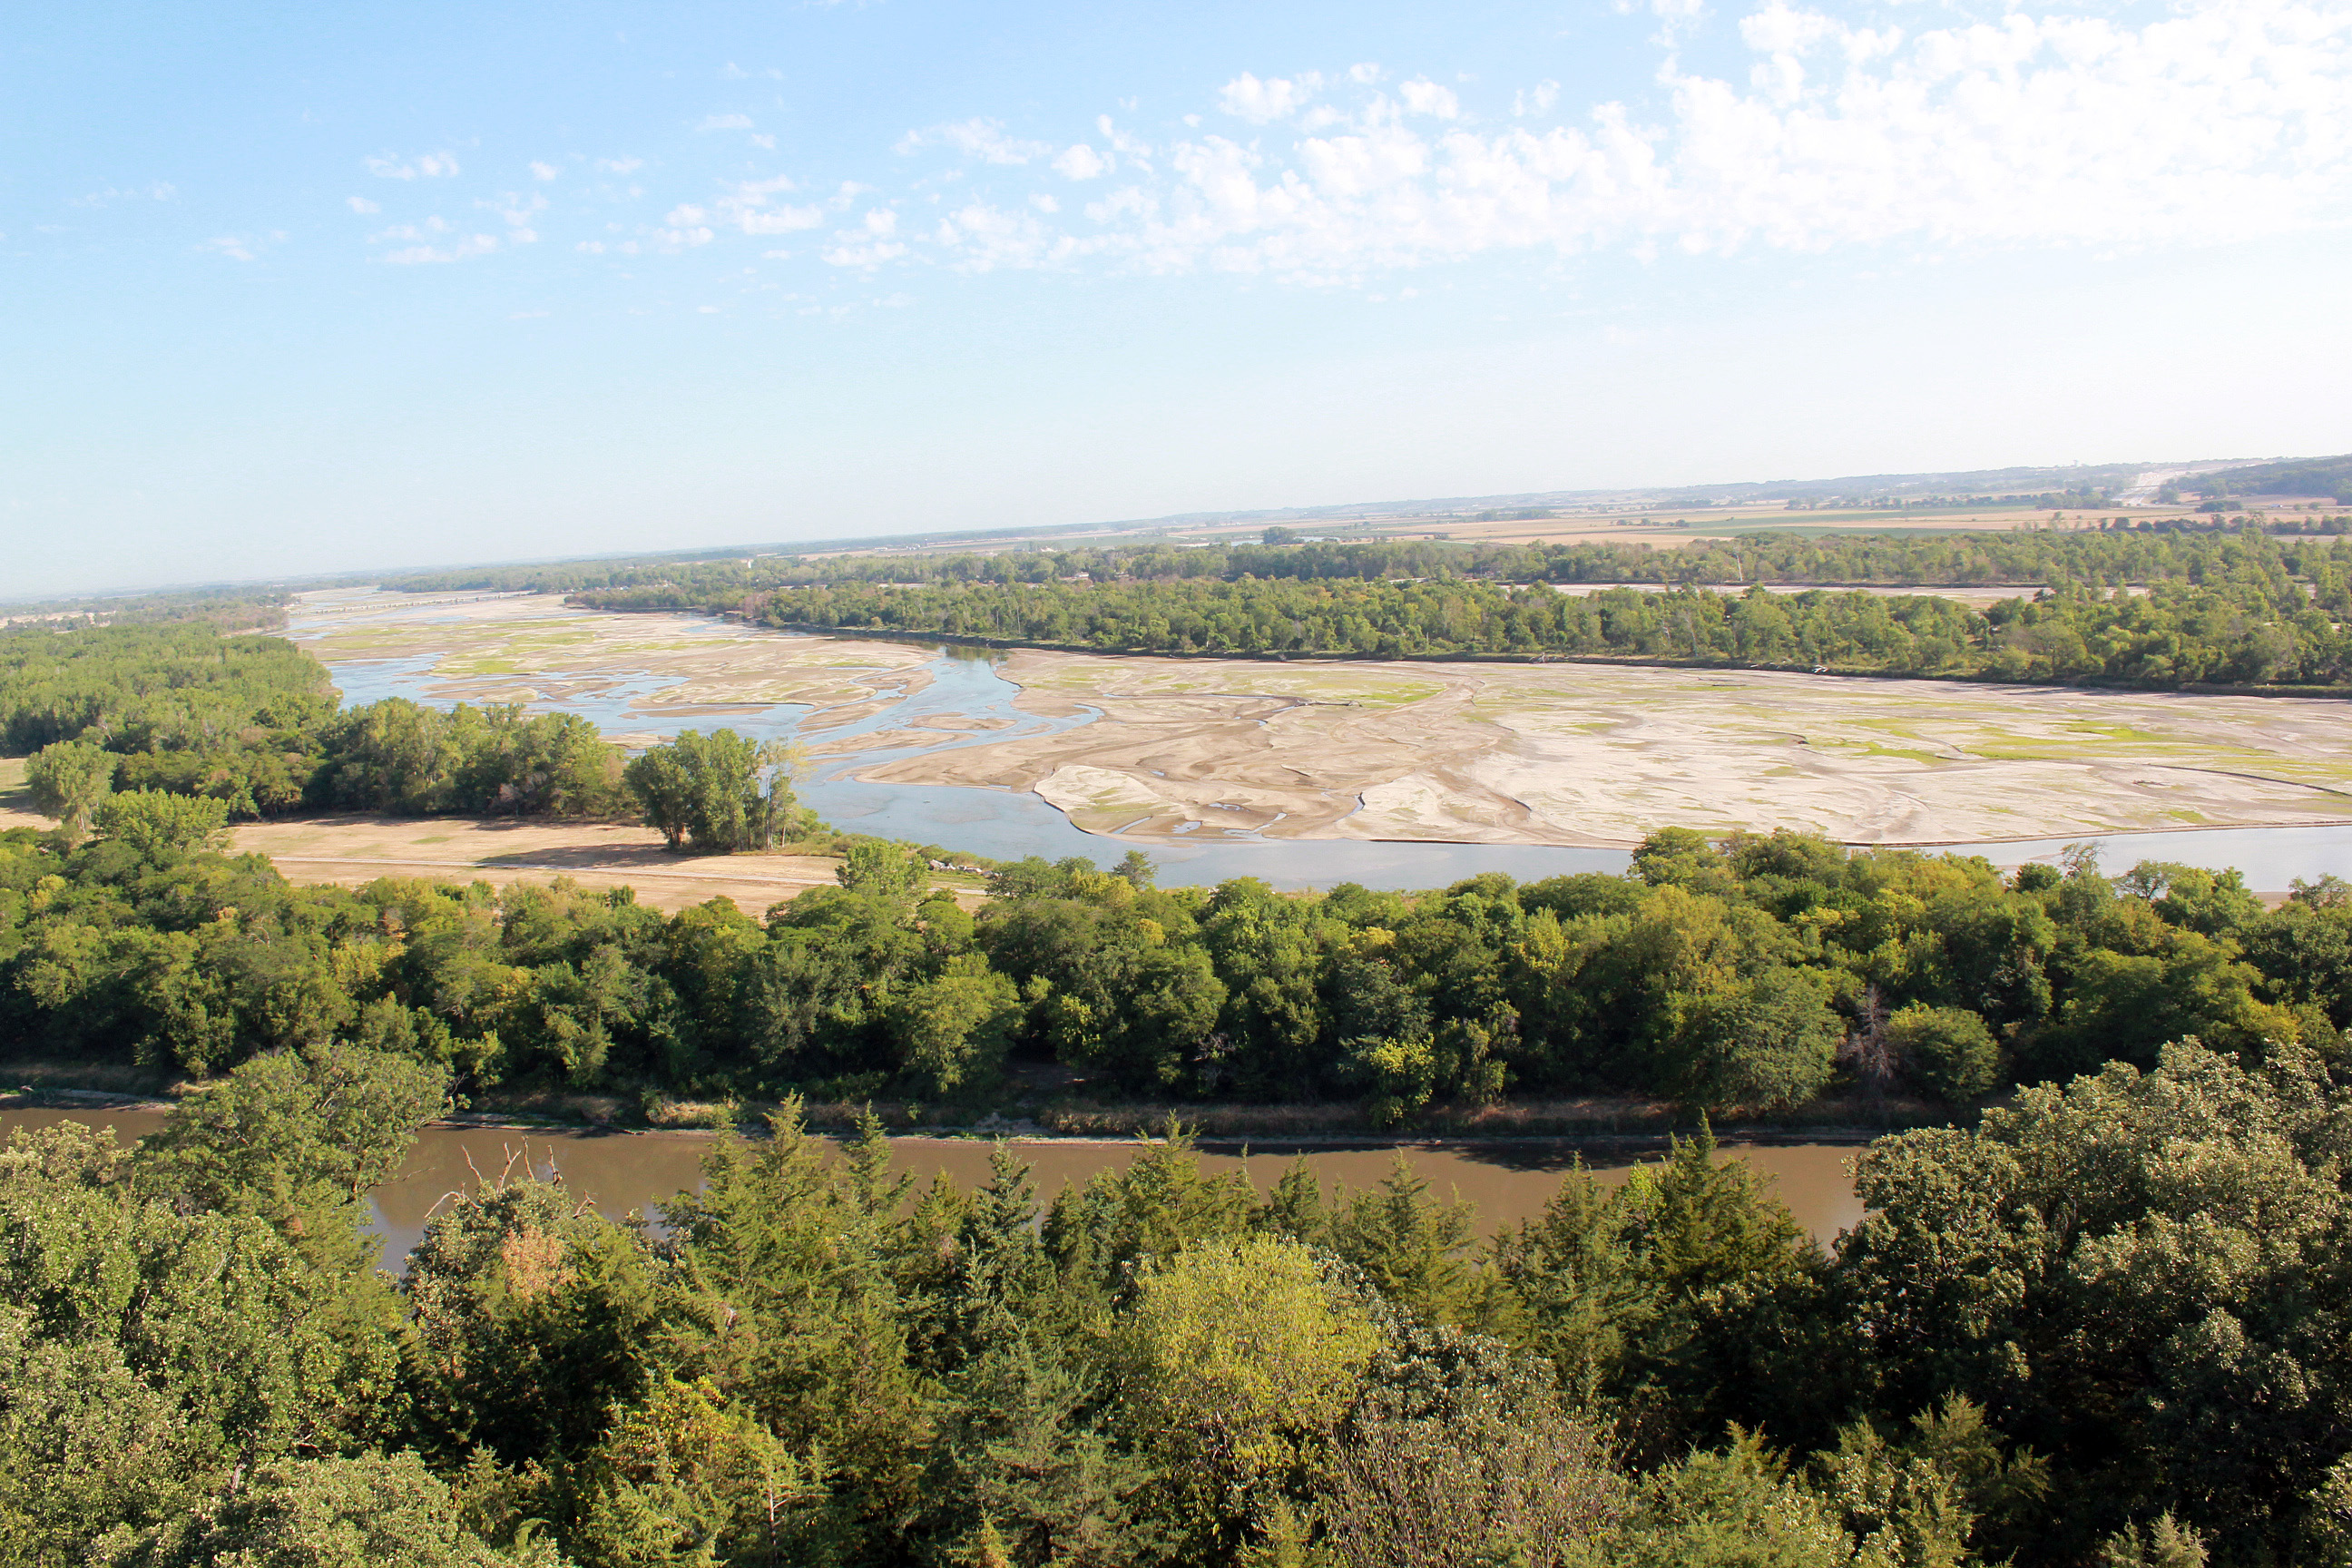 A view of the Platte River during the 2012 drought. | Nicole Wall, National Drought Mitigation Center